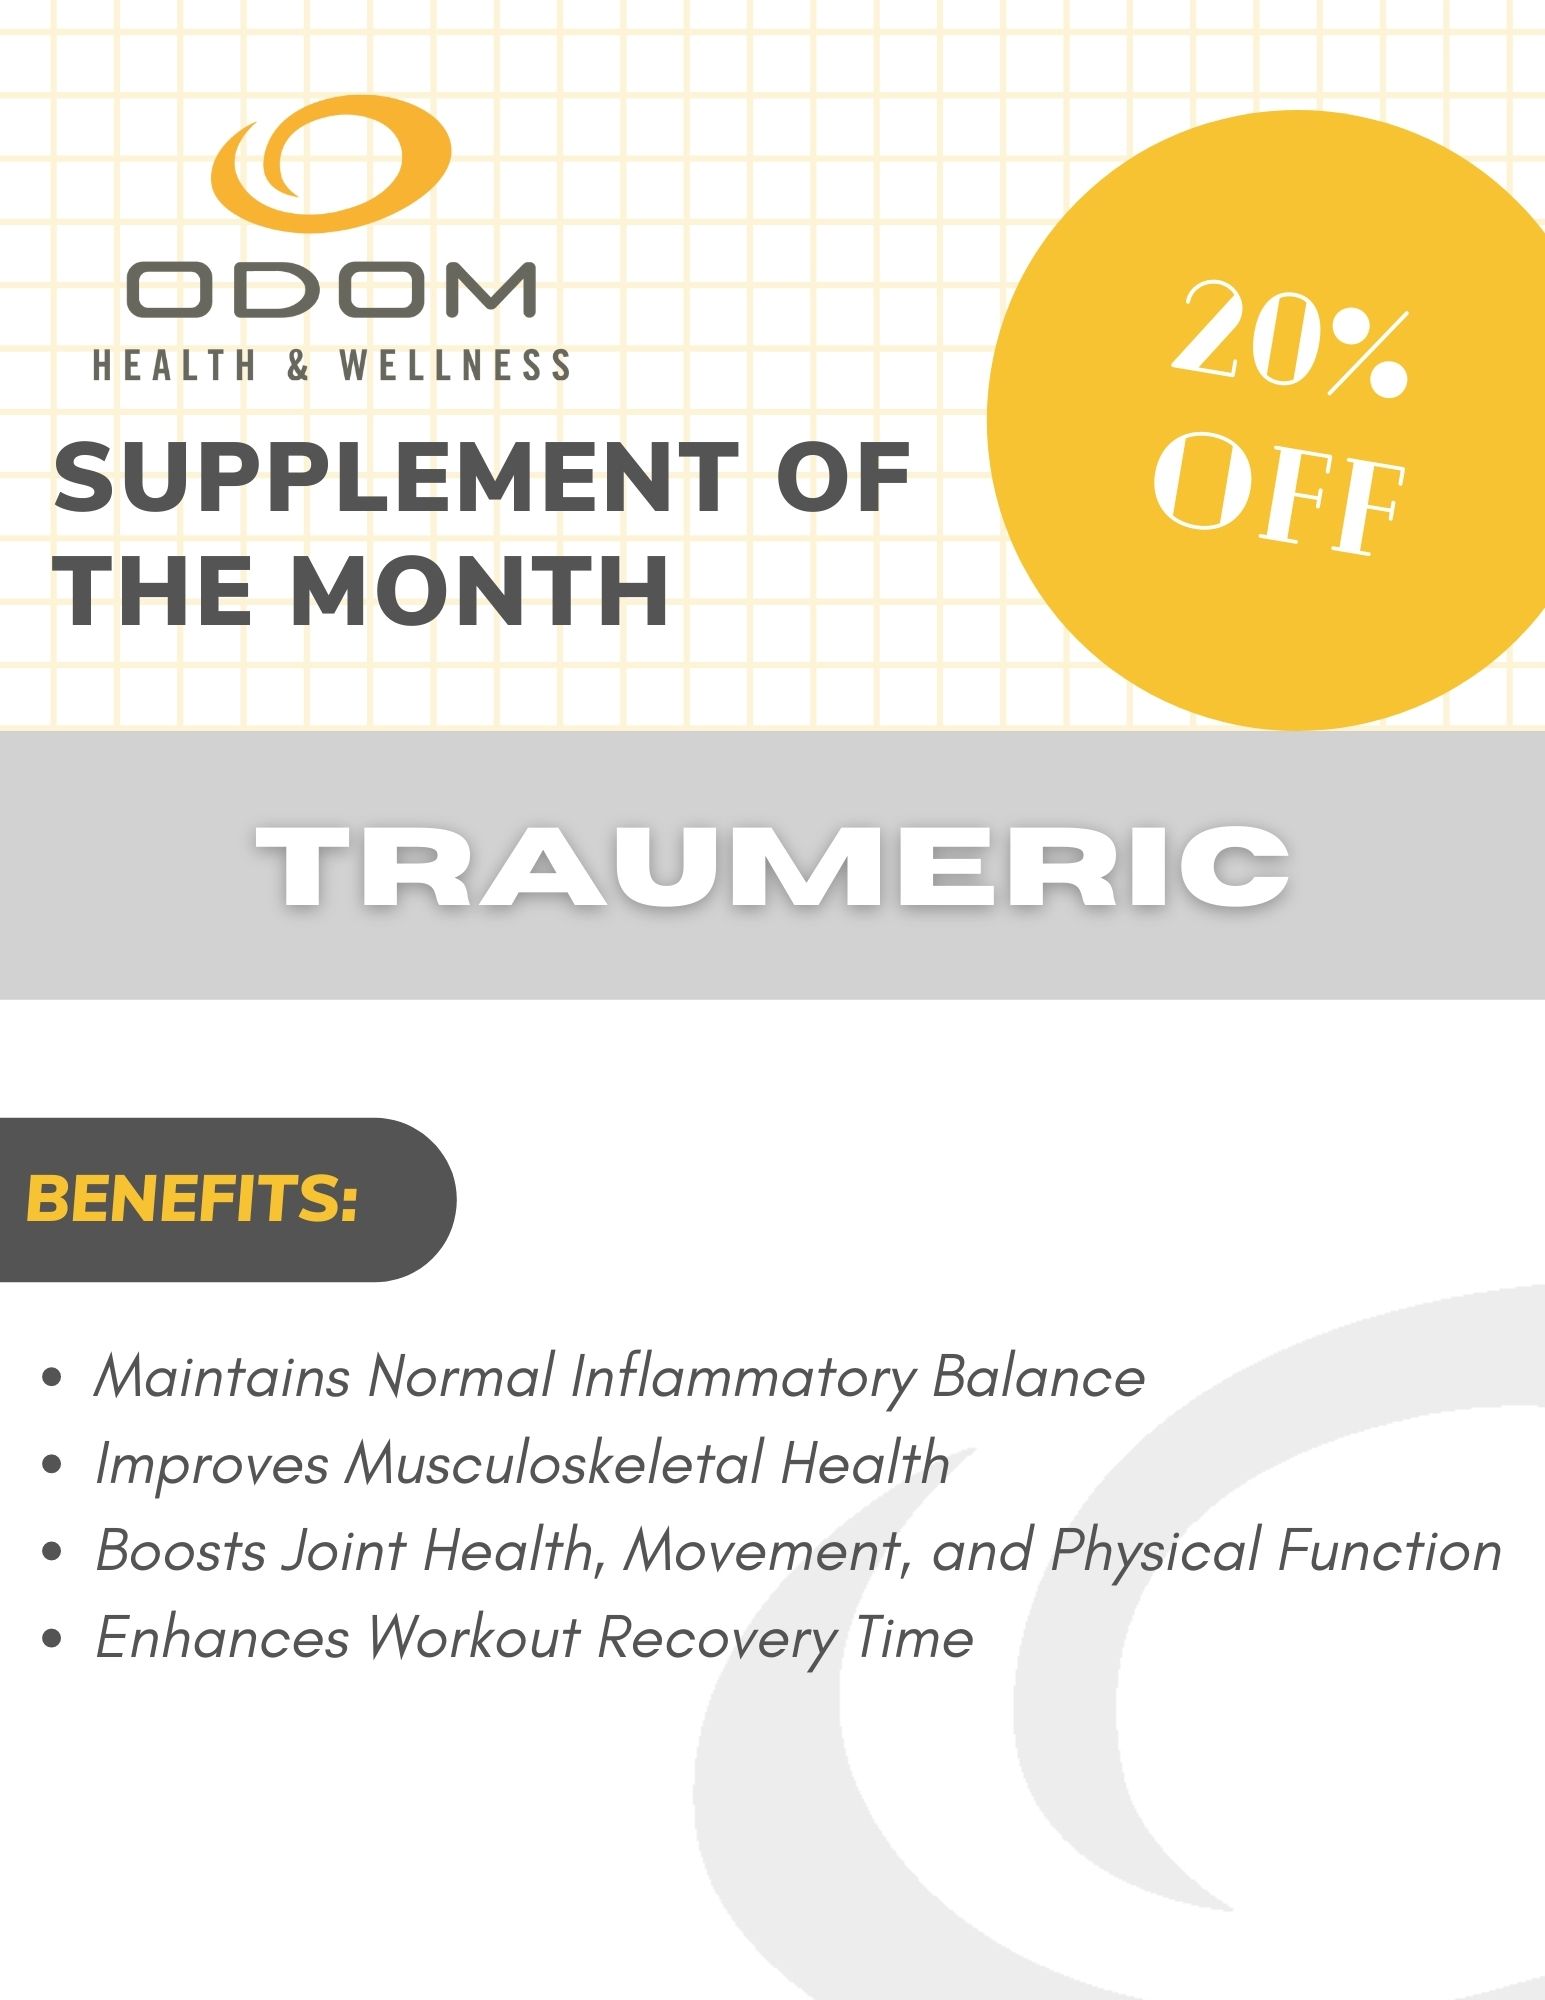 Get traumeric this February to reduce inflammation and improve your body's movement